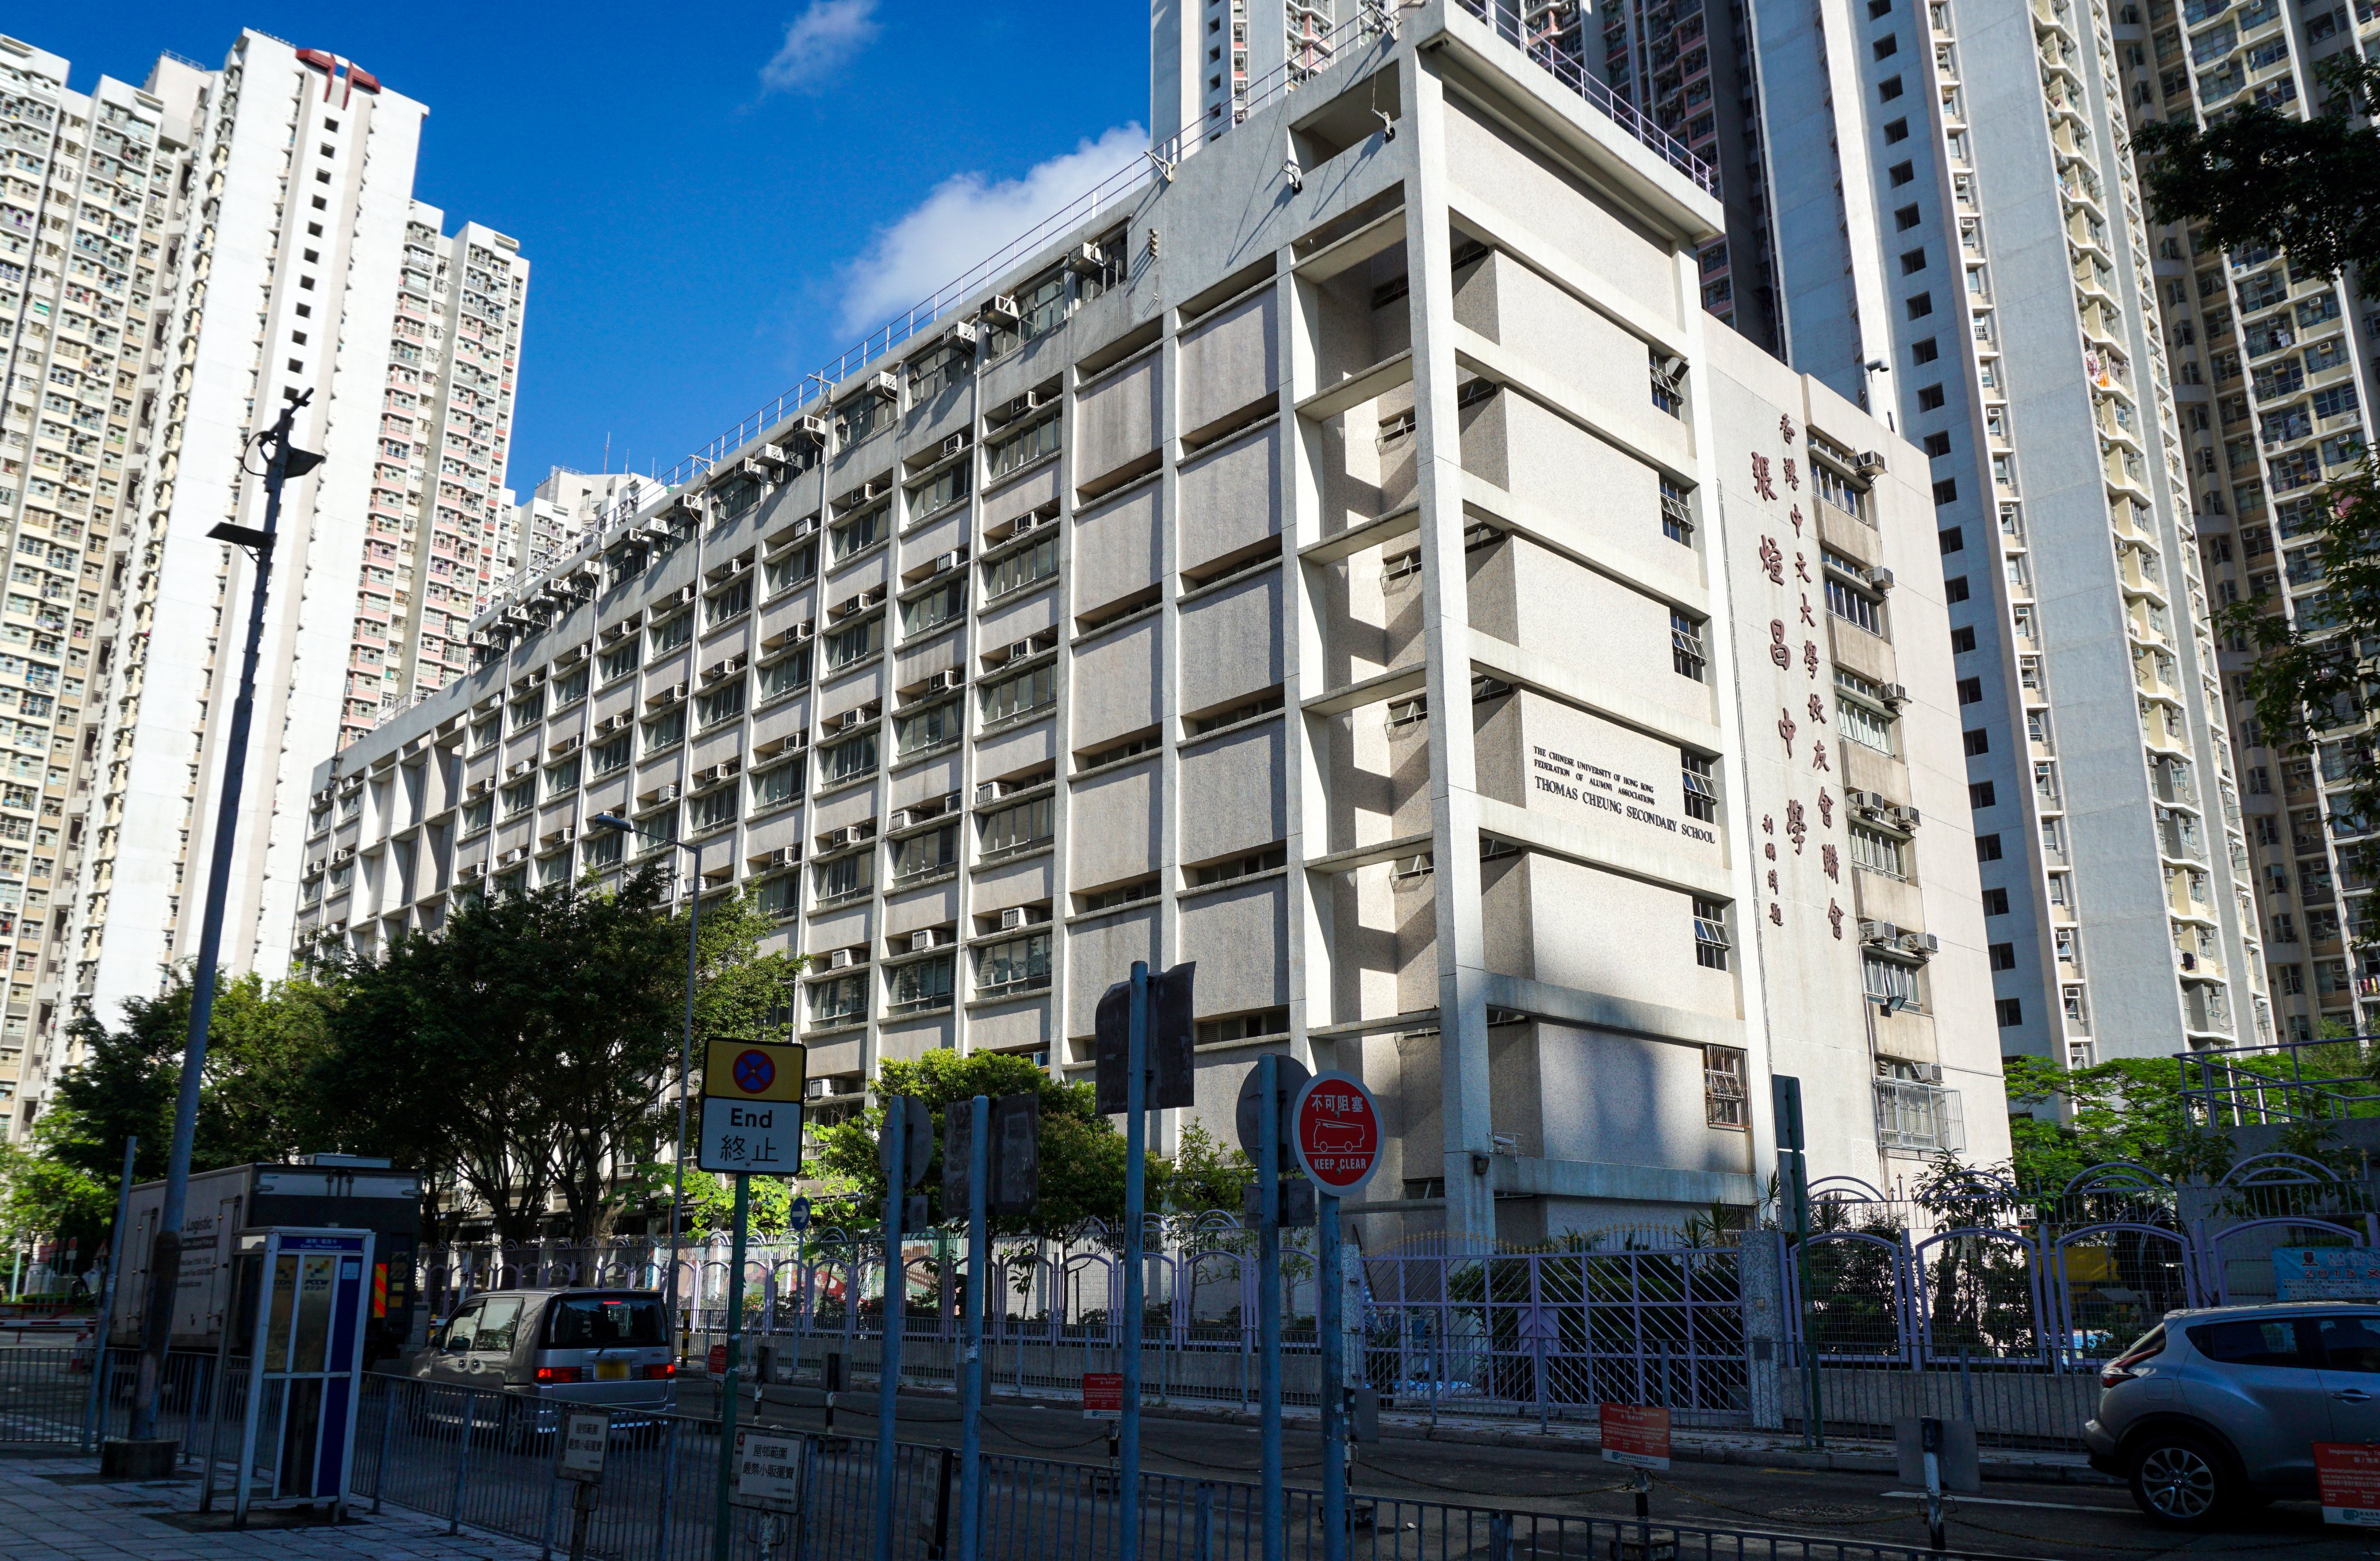 A teacher who internet users claim visited prostitutes is from CUHKFAA Thomas Cheung Secondary School. Photo: Wikimedia